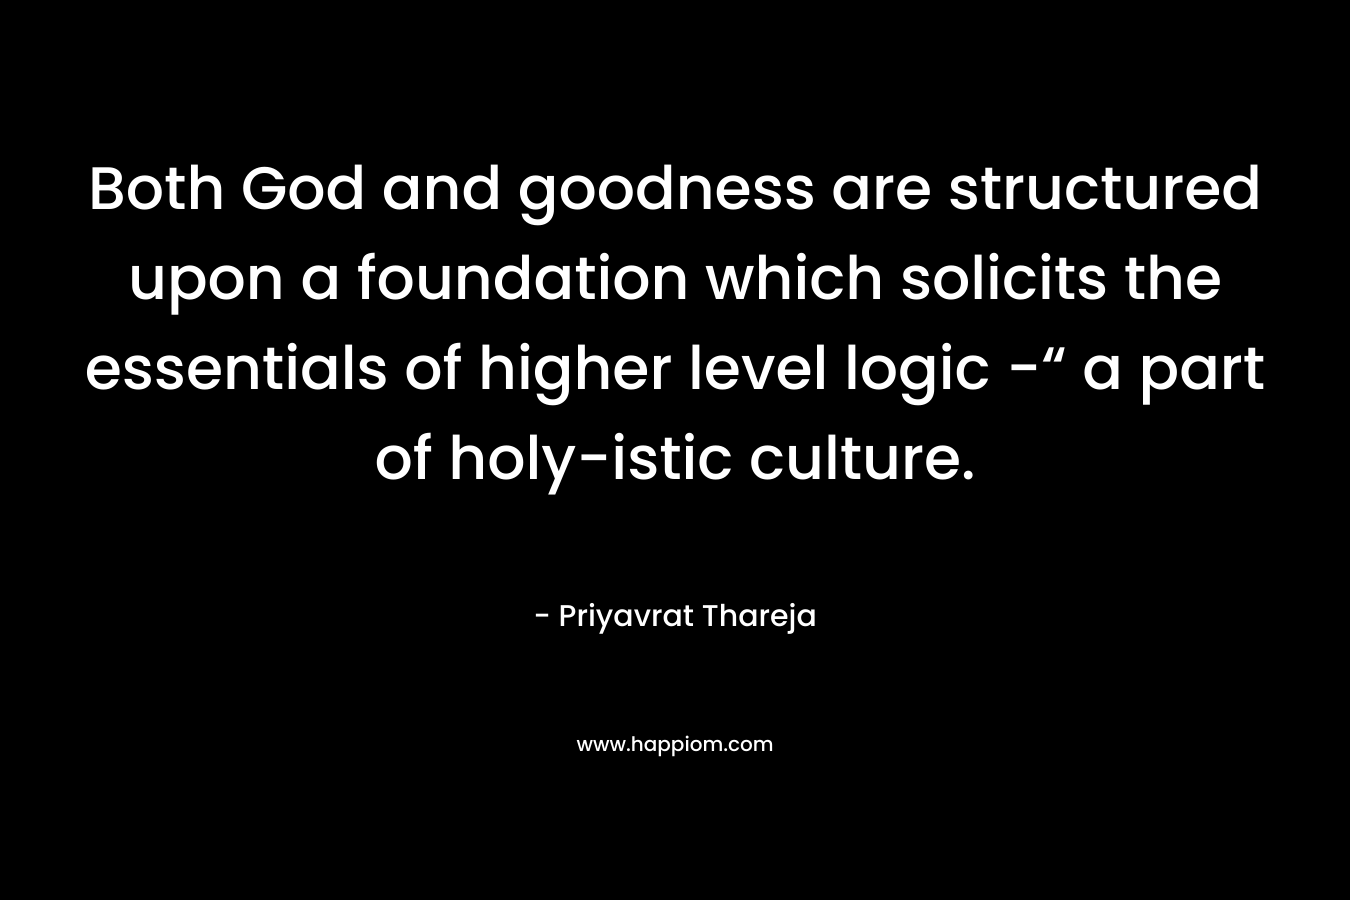 Both God and goodness are structured upon a foundation which solicits the essentials of higher level logic -“ a part of holy-istic culture.